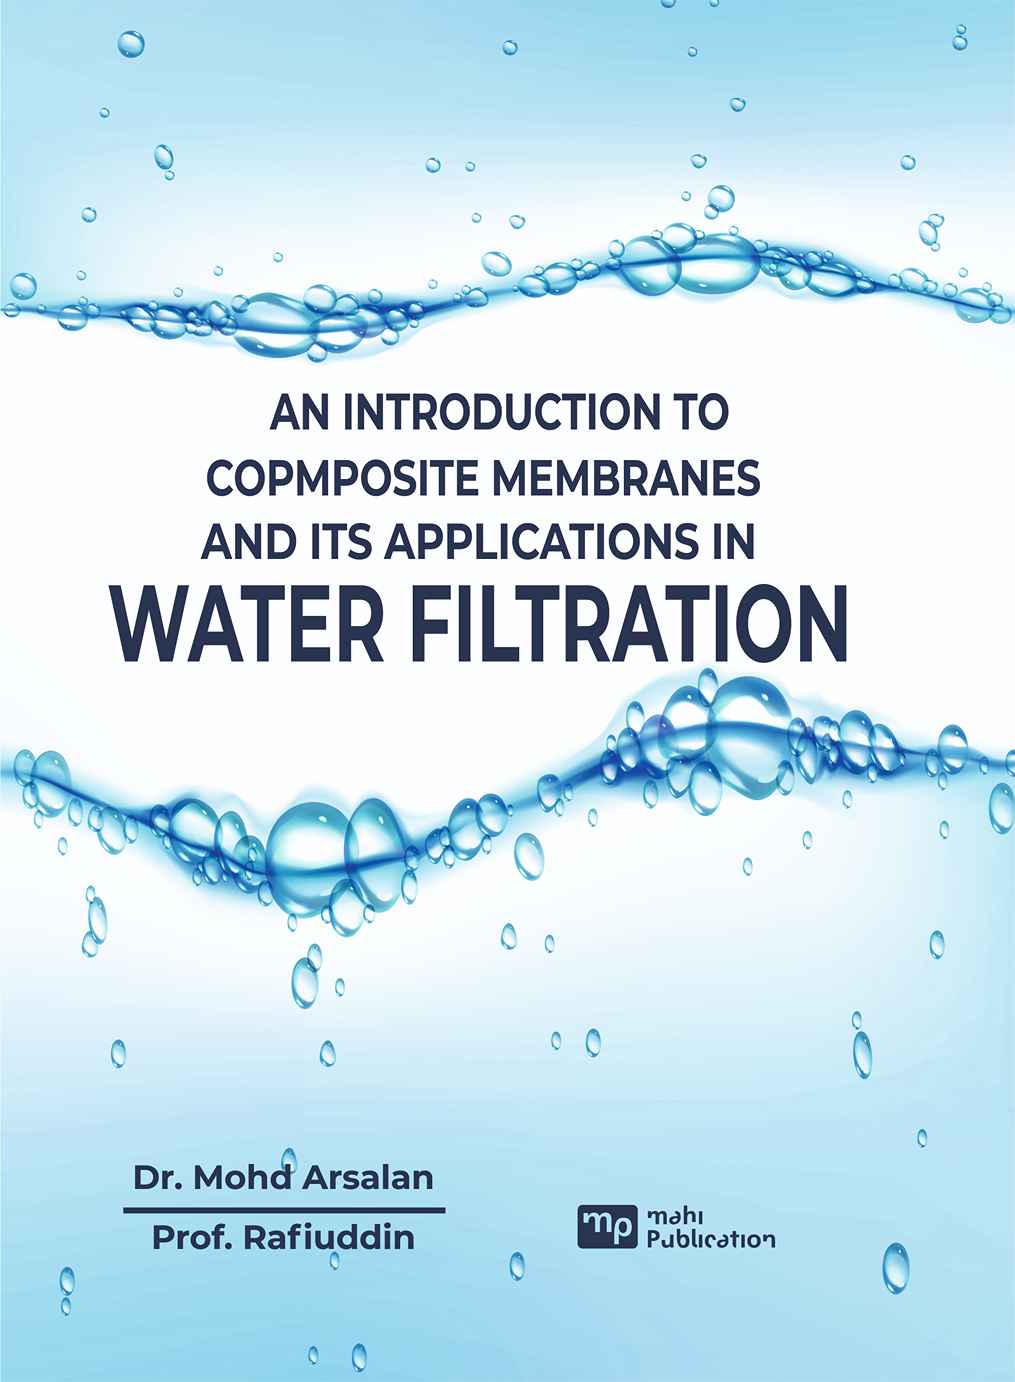 An Introduction to Copmposite Membranes and its Applications in Water Filtration